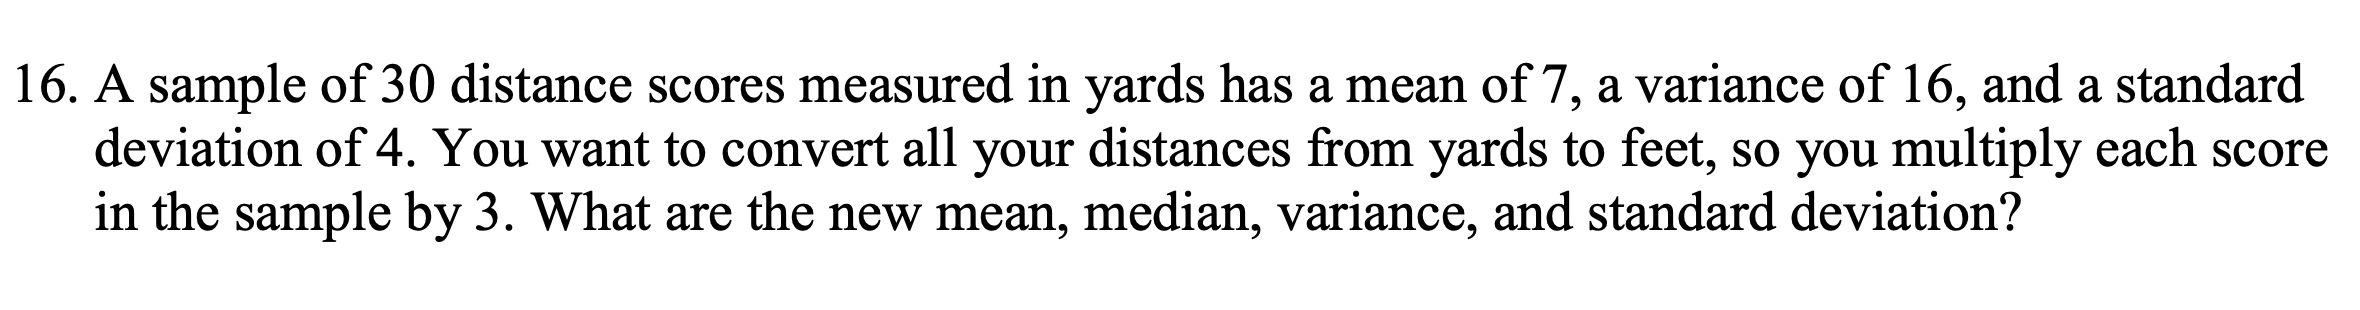 A sample of 30 distance scores measured in yards has a mean of 7, a variance of 16, and a standard
deviation of 4. You want to convert all your distances from yards to feet, so you multiply each score
in the sample by 3. What are the new mean, median, variance, and standard deviation?
